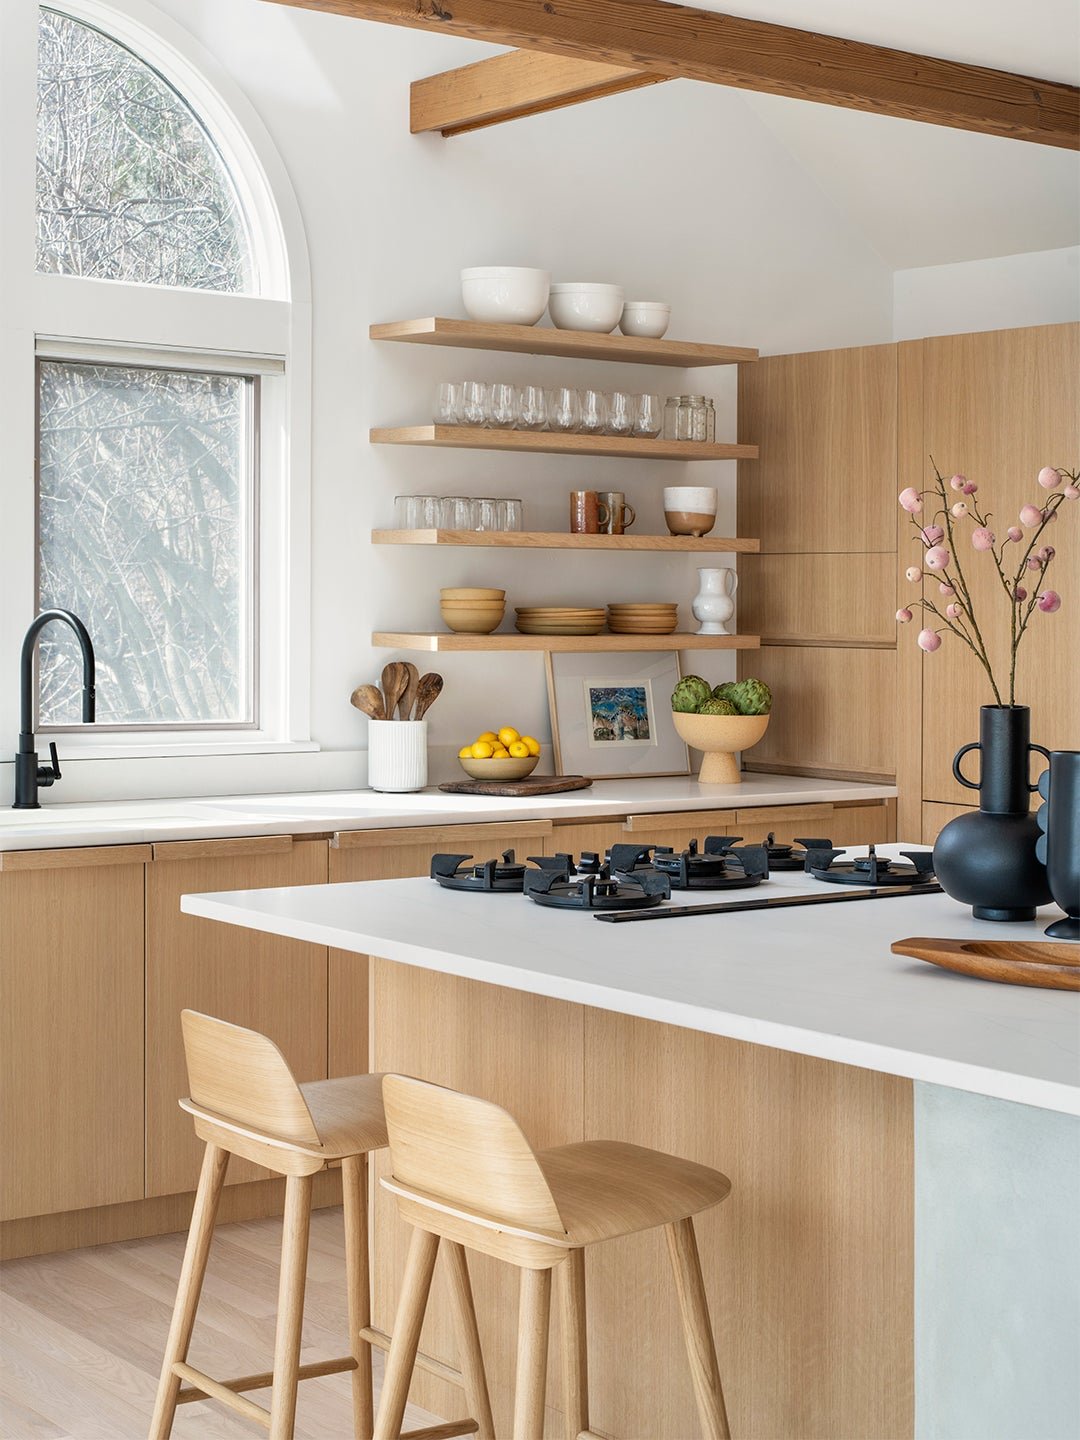 An Upstate New York Kitchen Once Worthy of the ’80s Is Now a Japandi Dream